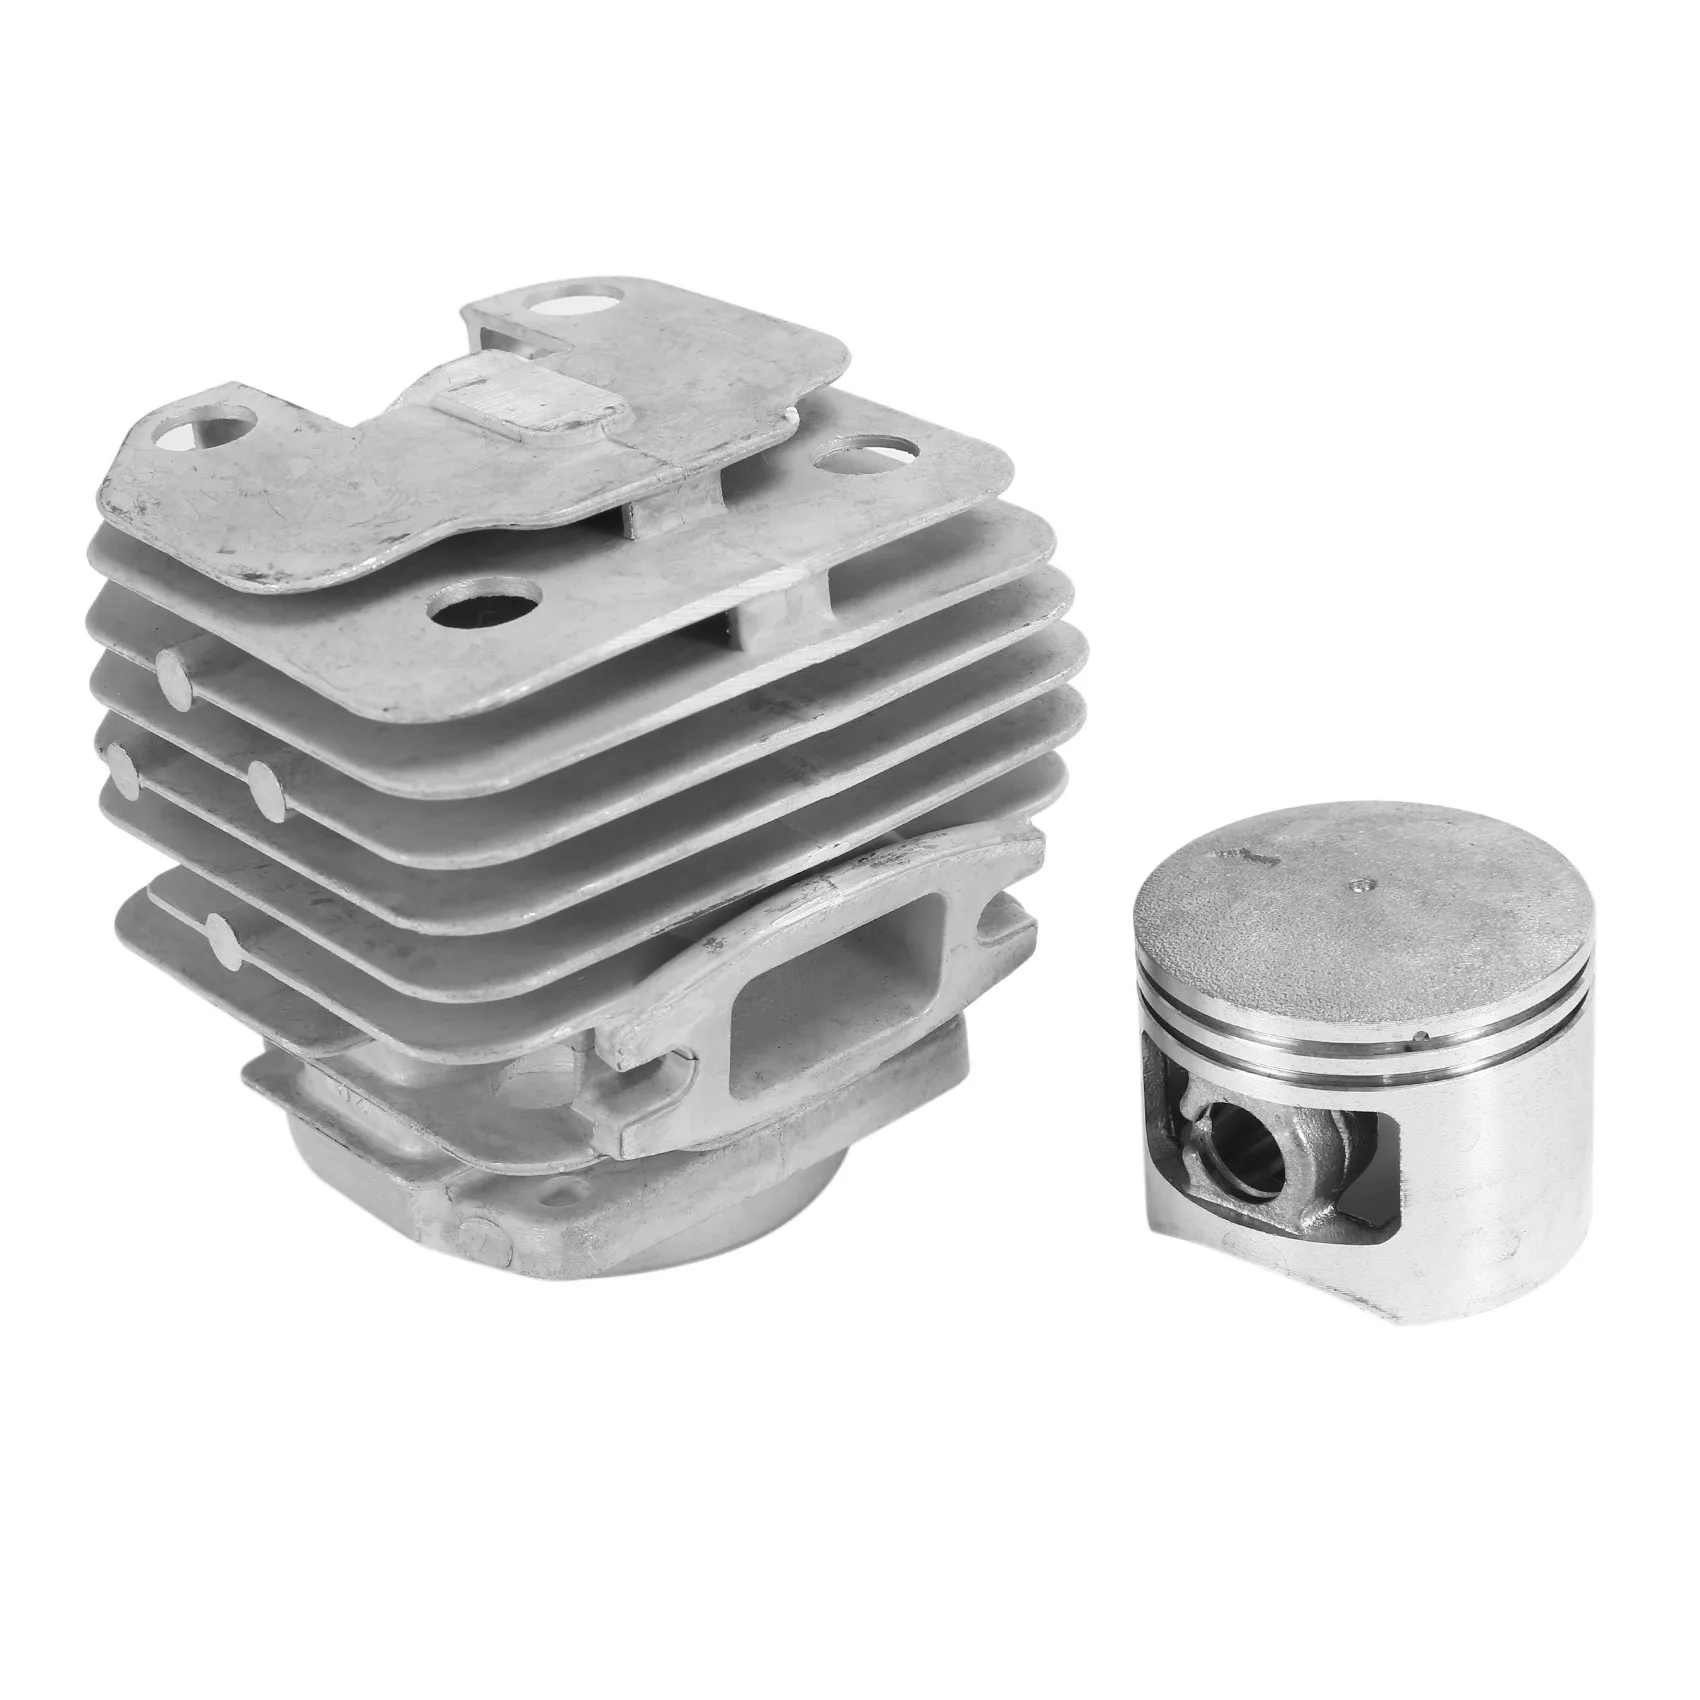 1 Set Diameter 45mm Chainsaw Cylinder and Piston Set Fit 52 52Cc Chainsaw Spare Parts for Gasoline/Oil Chainsaw Spares